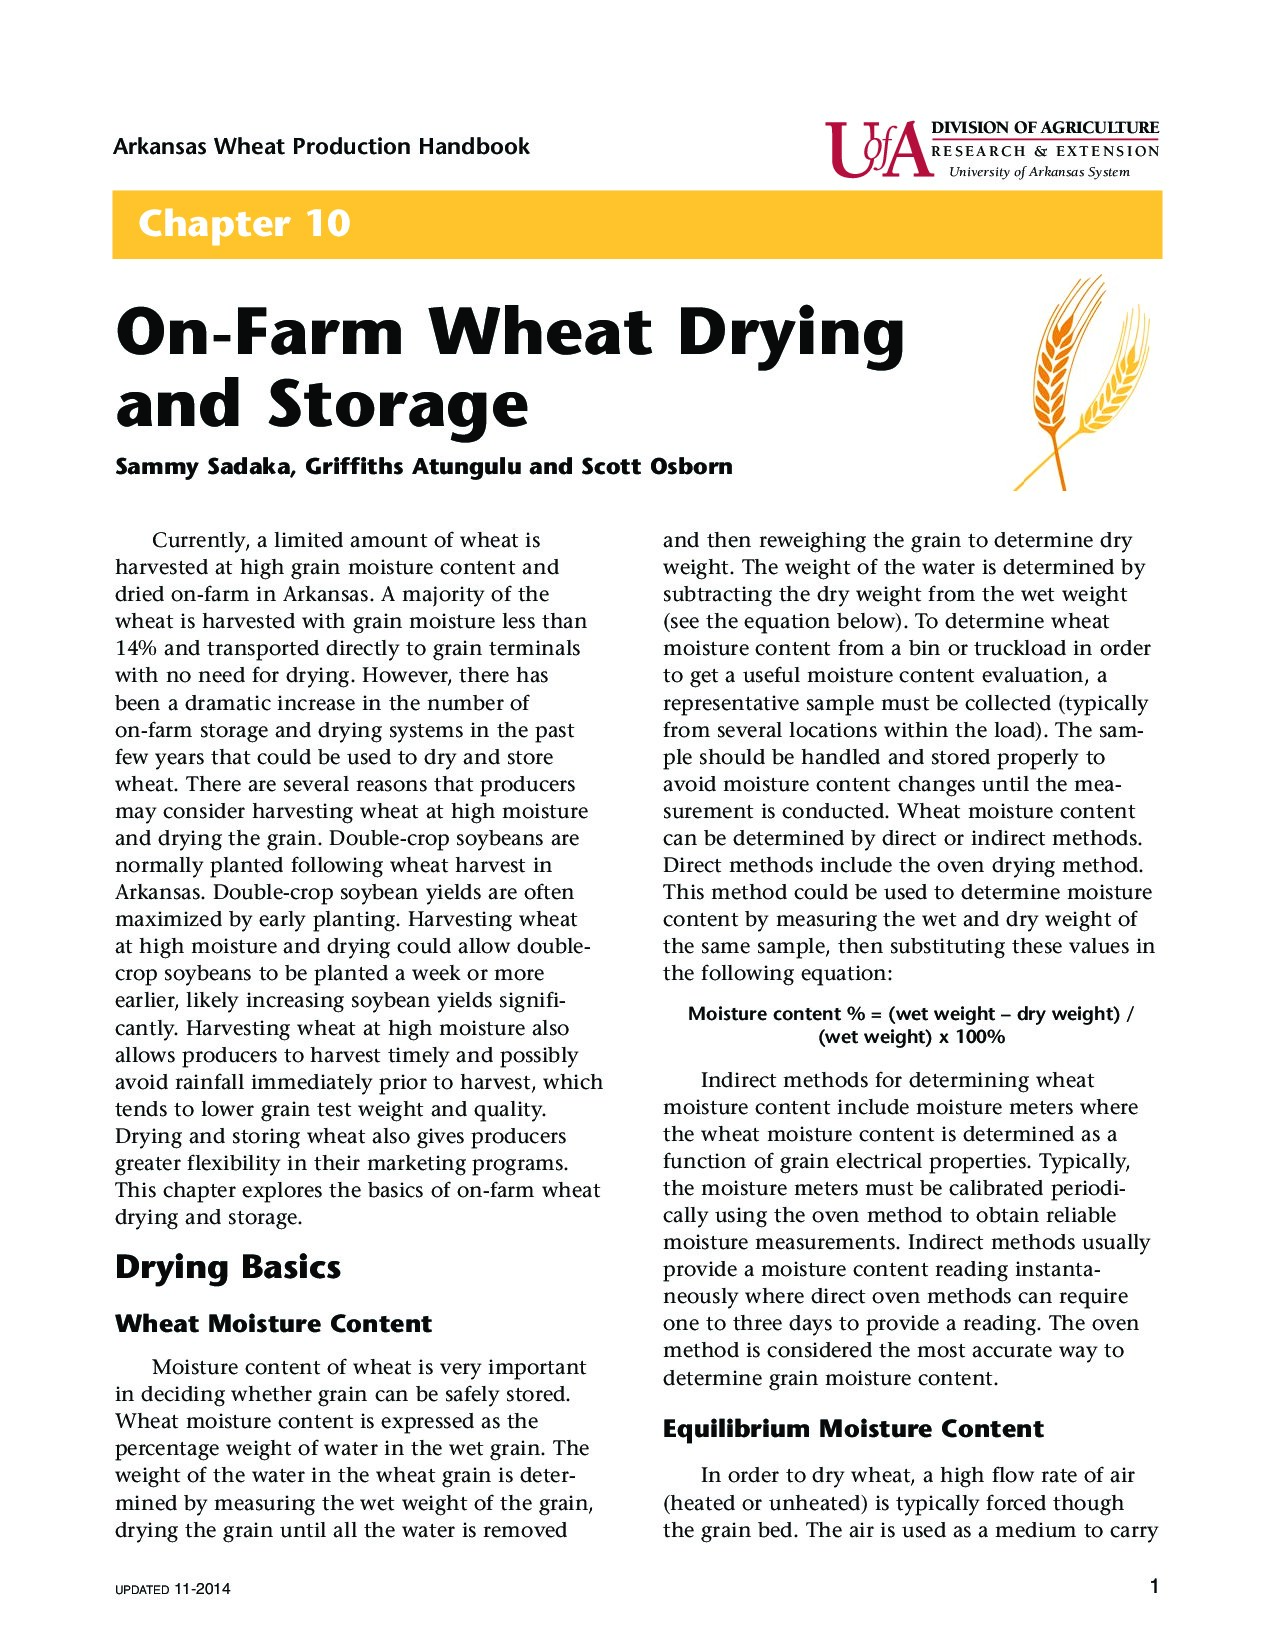 On-Farm Wheat Drying and Storage, Chapter 10, MP404